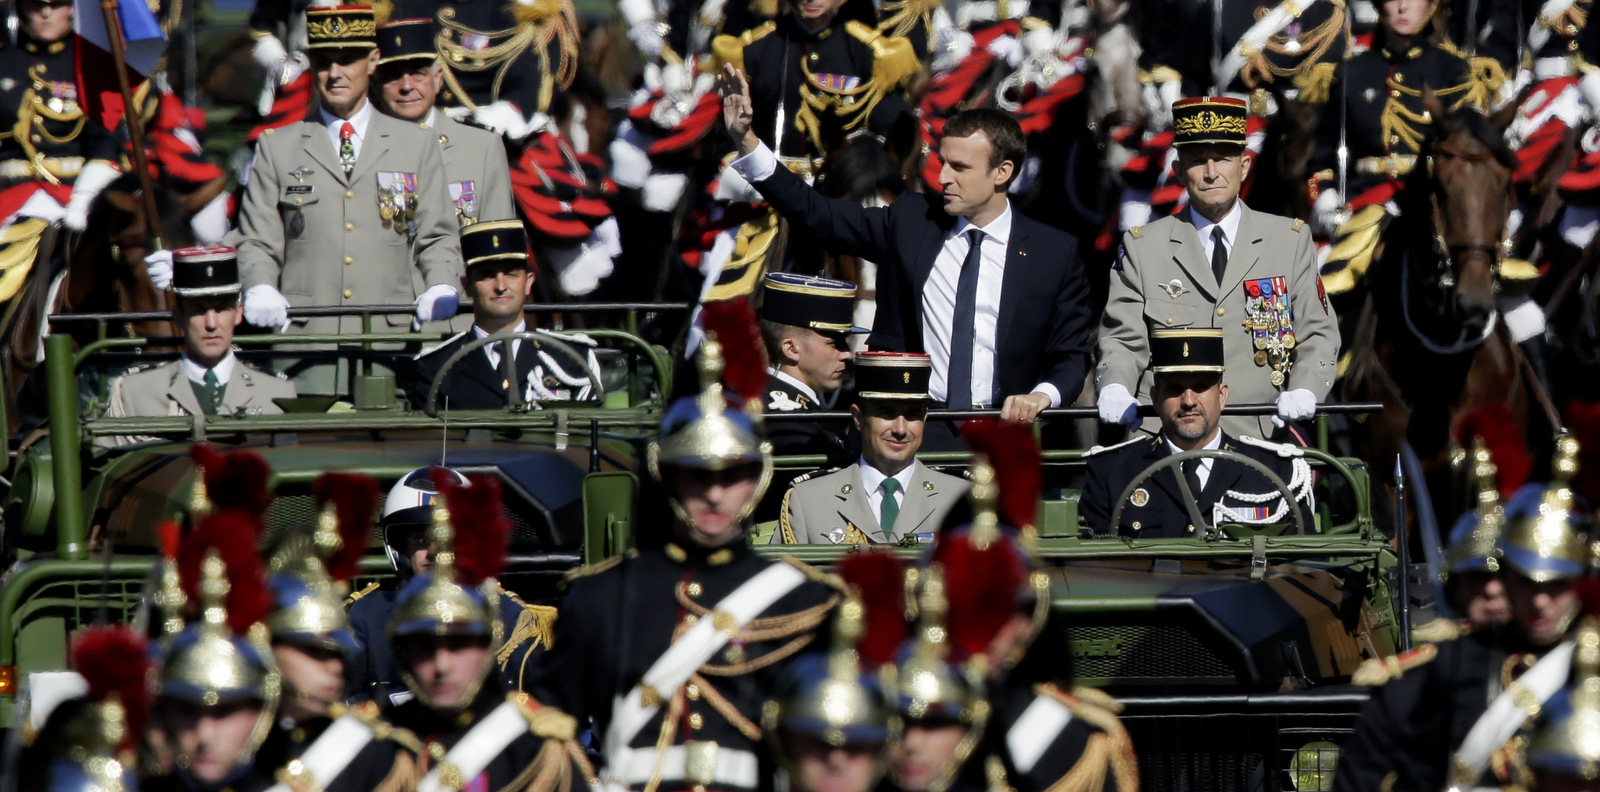 French President Emmanuel Macron, left, and Chief of the Defense Staff Gen. Pierre de Villiers, right, drive down the Champs Elysees avenue during Bastille Day parade in Paris, July 14, 2017. (AP/Markus Schreiber)